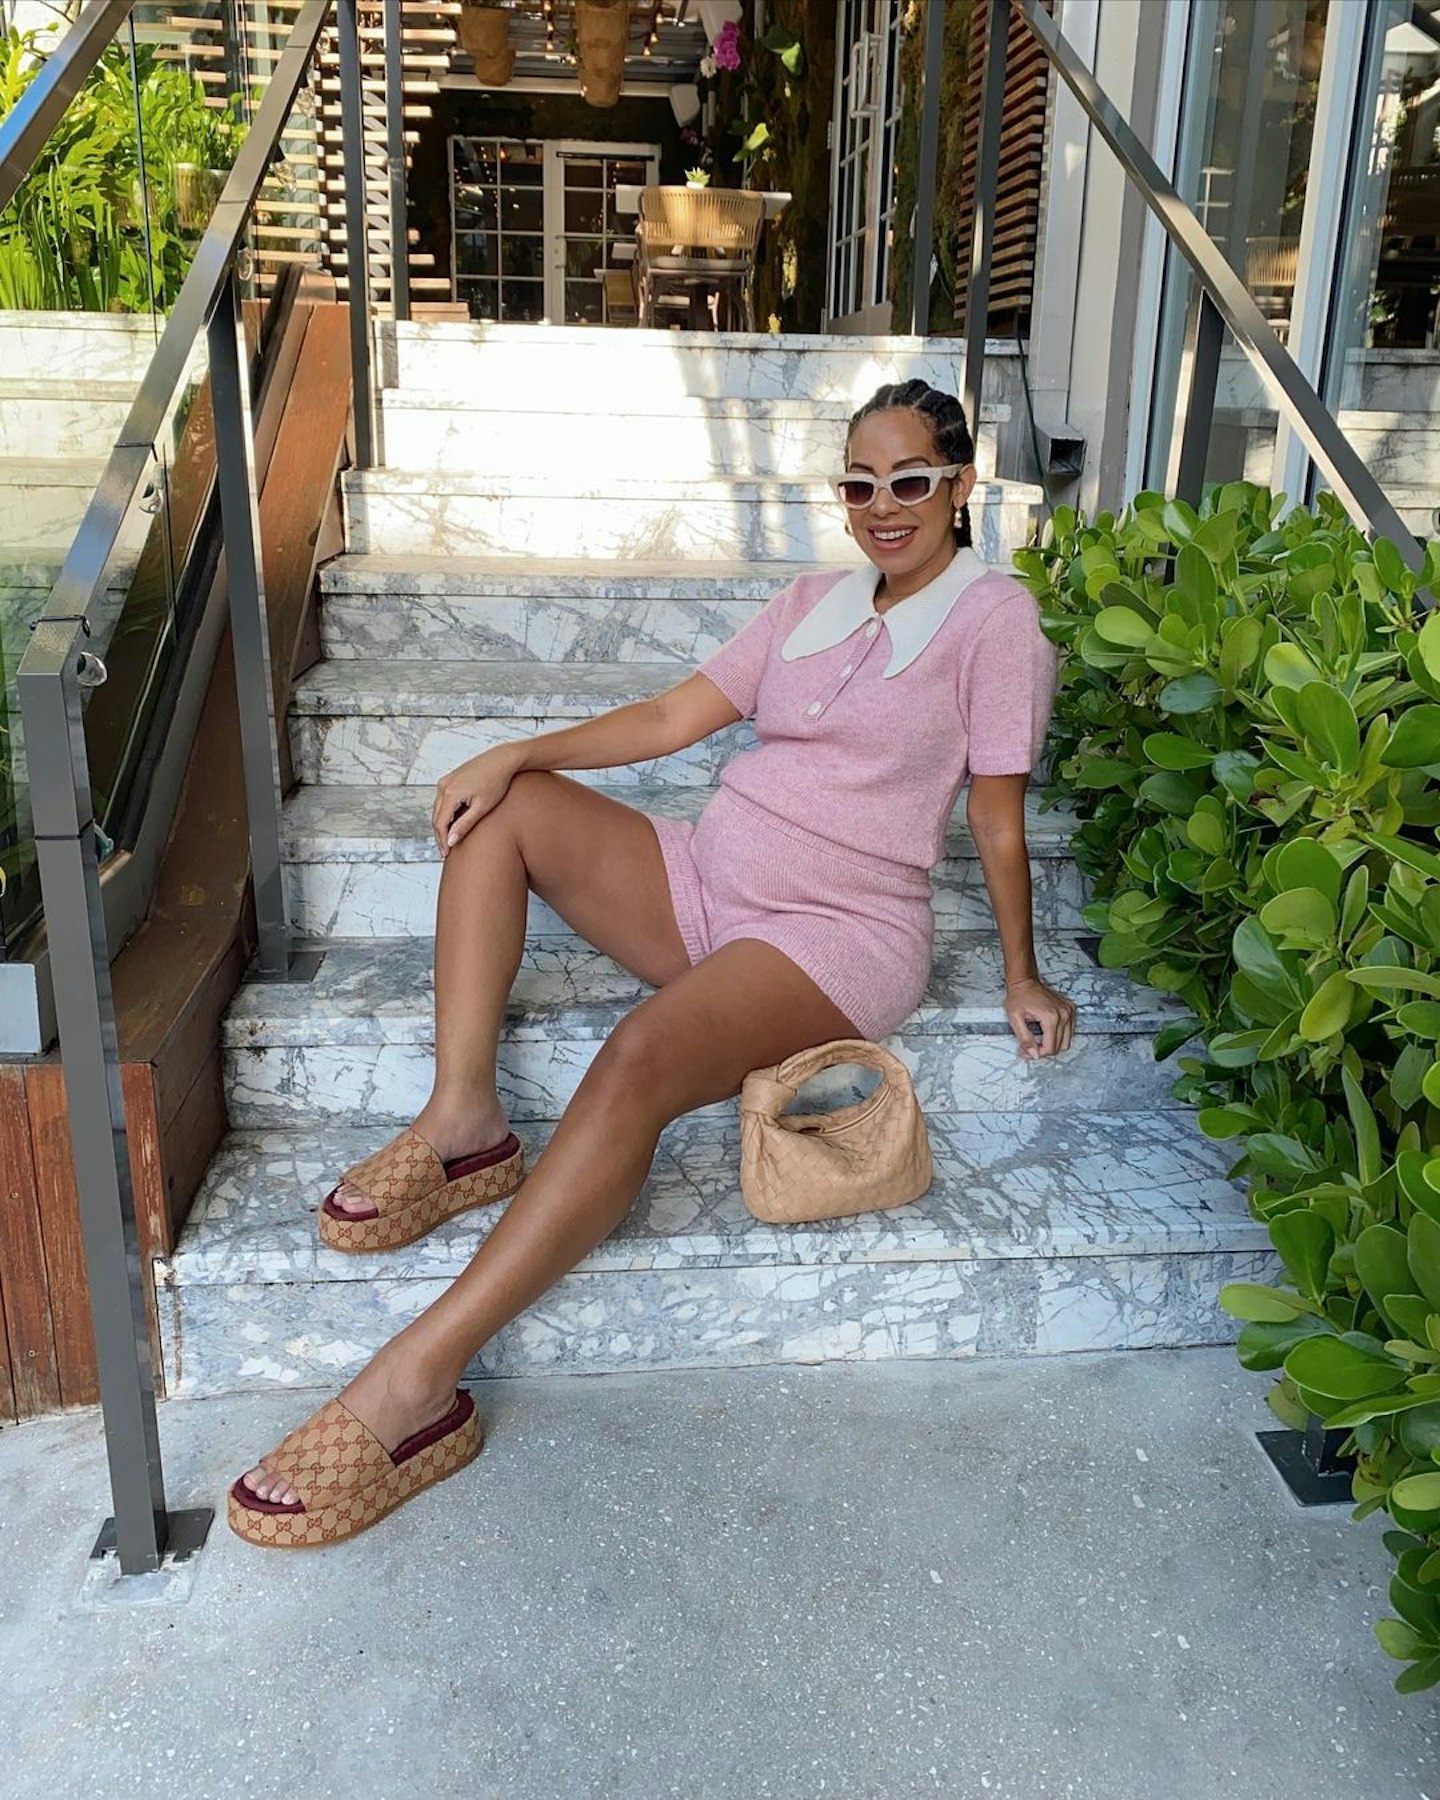 6 Influencers To Follow For Maternity Style Inspiration